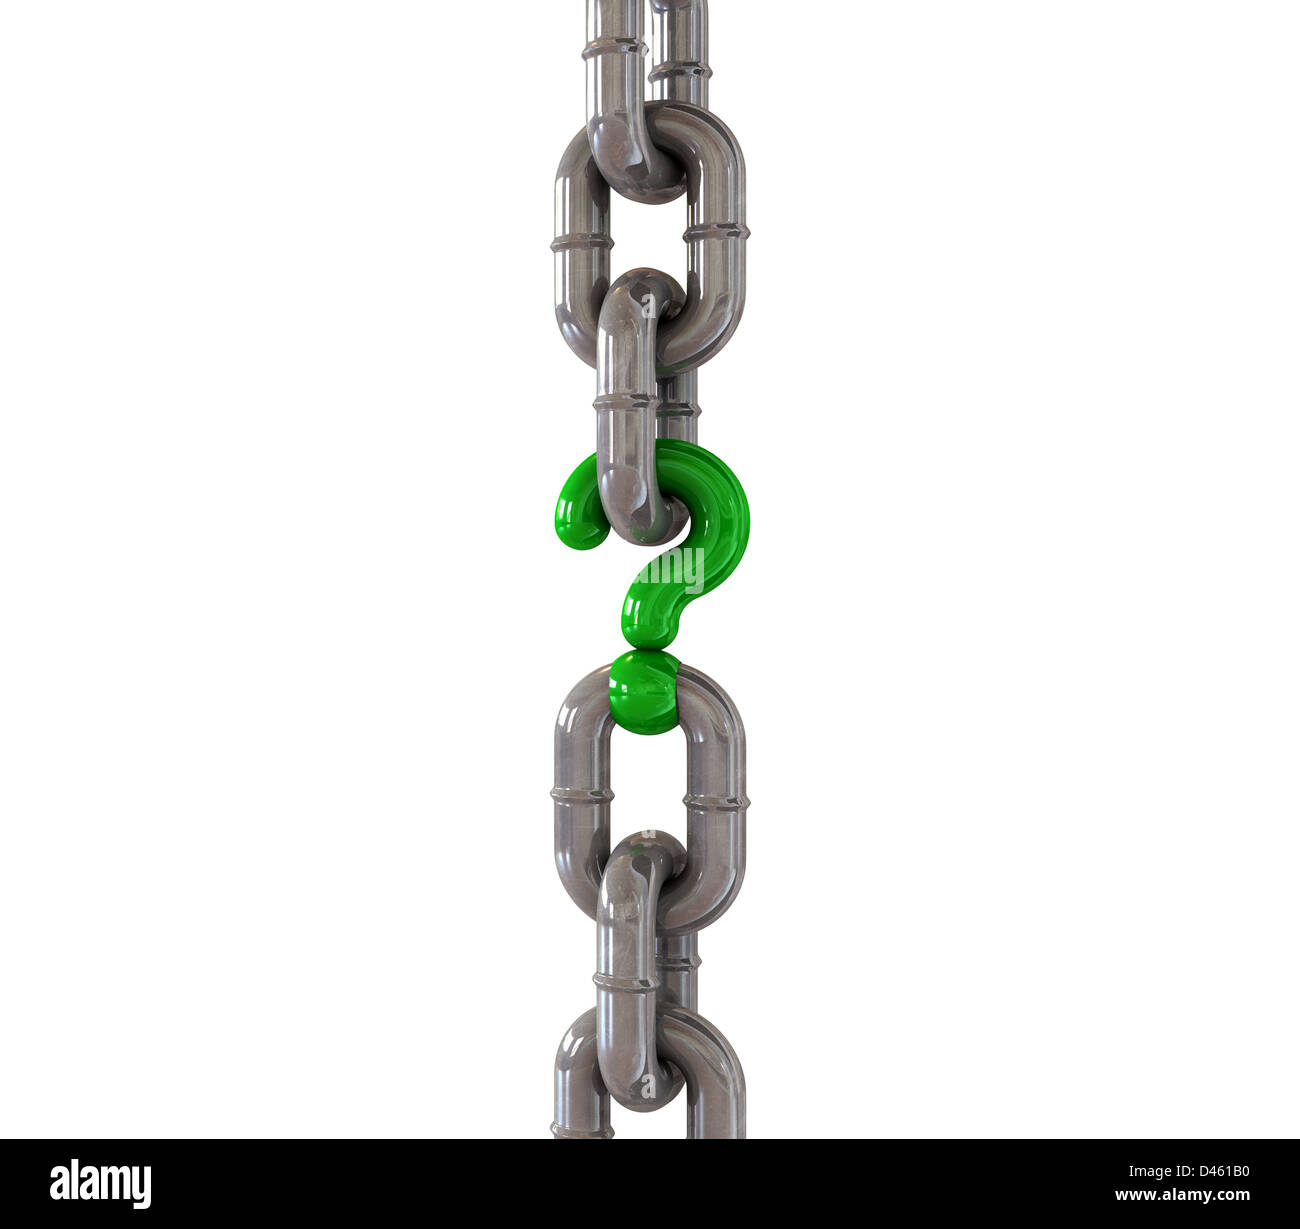 A metal chain with a green question mark as one of its links Stock Photo